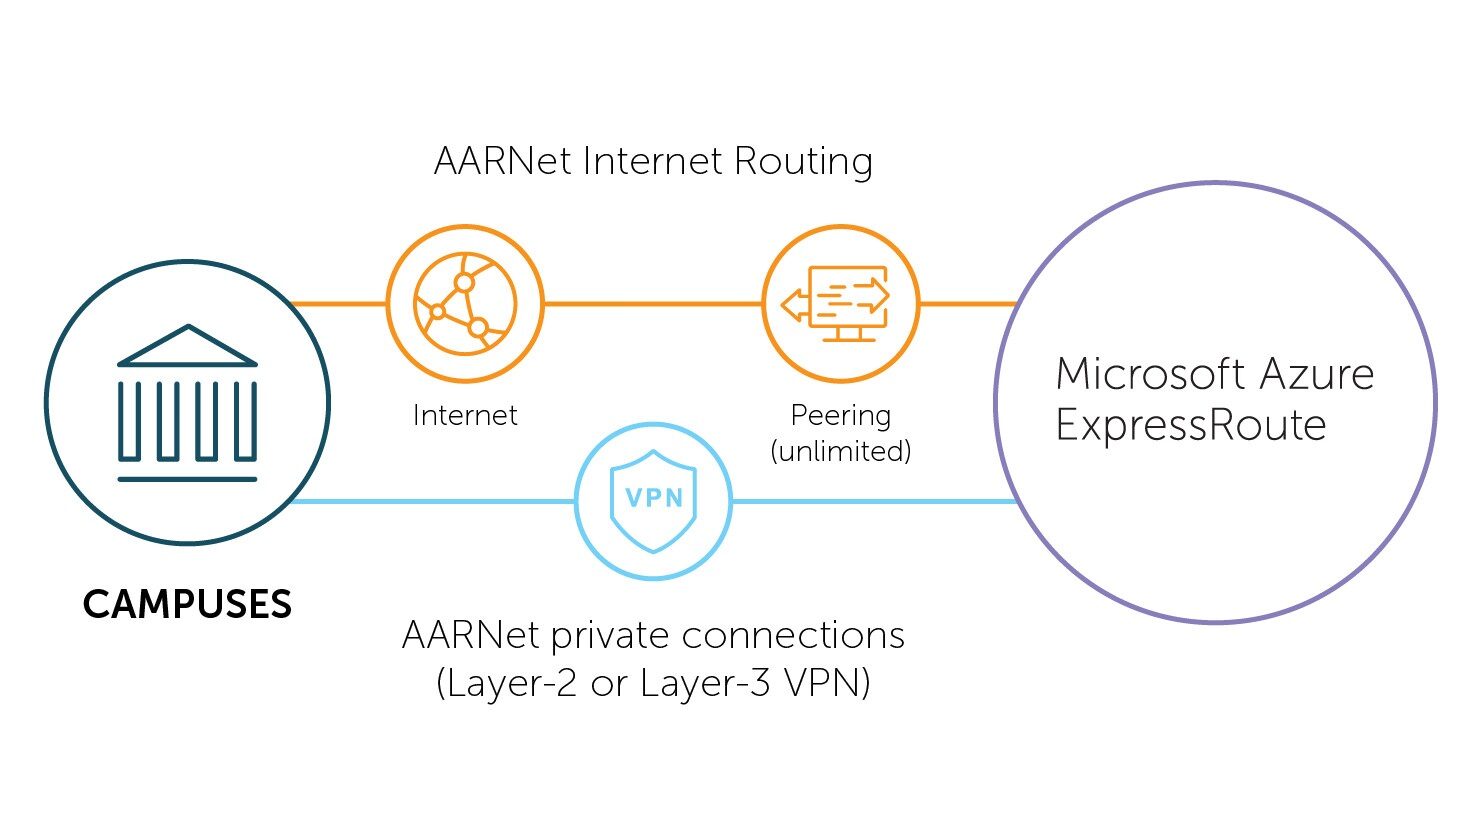 How AARNet connects your campus to Microsoft Azure ExpressRoute